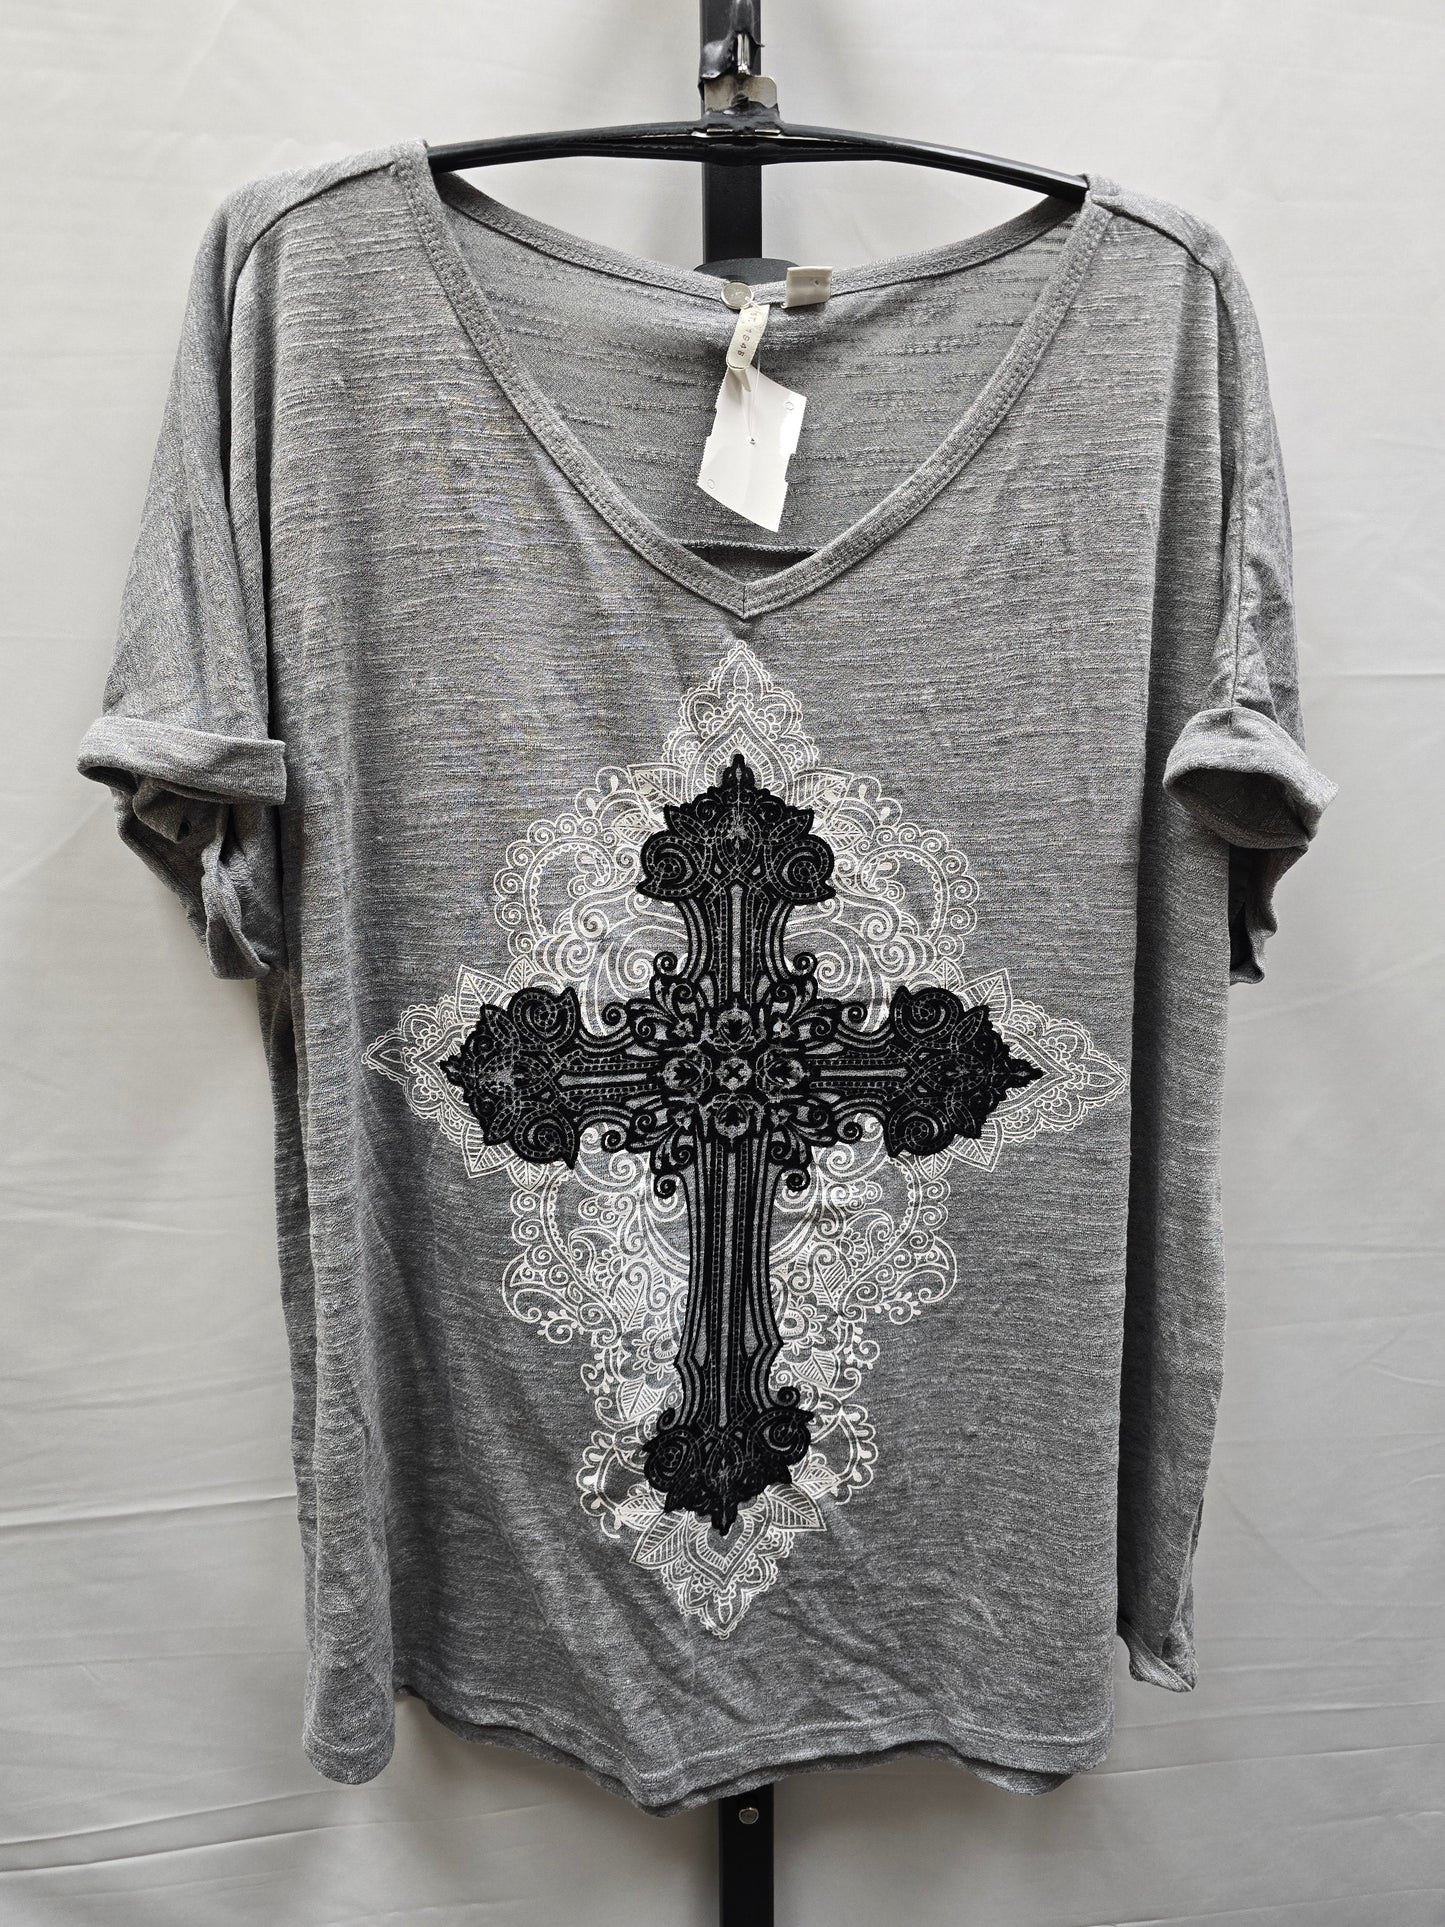 Black & Grey Top Short Sleeve Cato, Size L